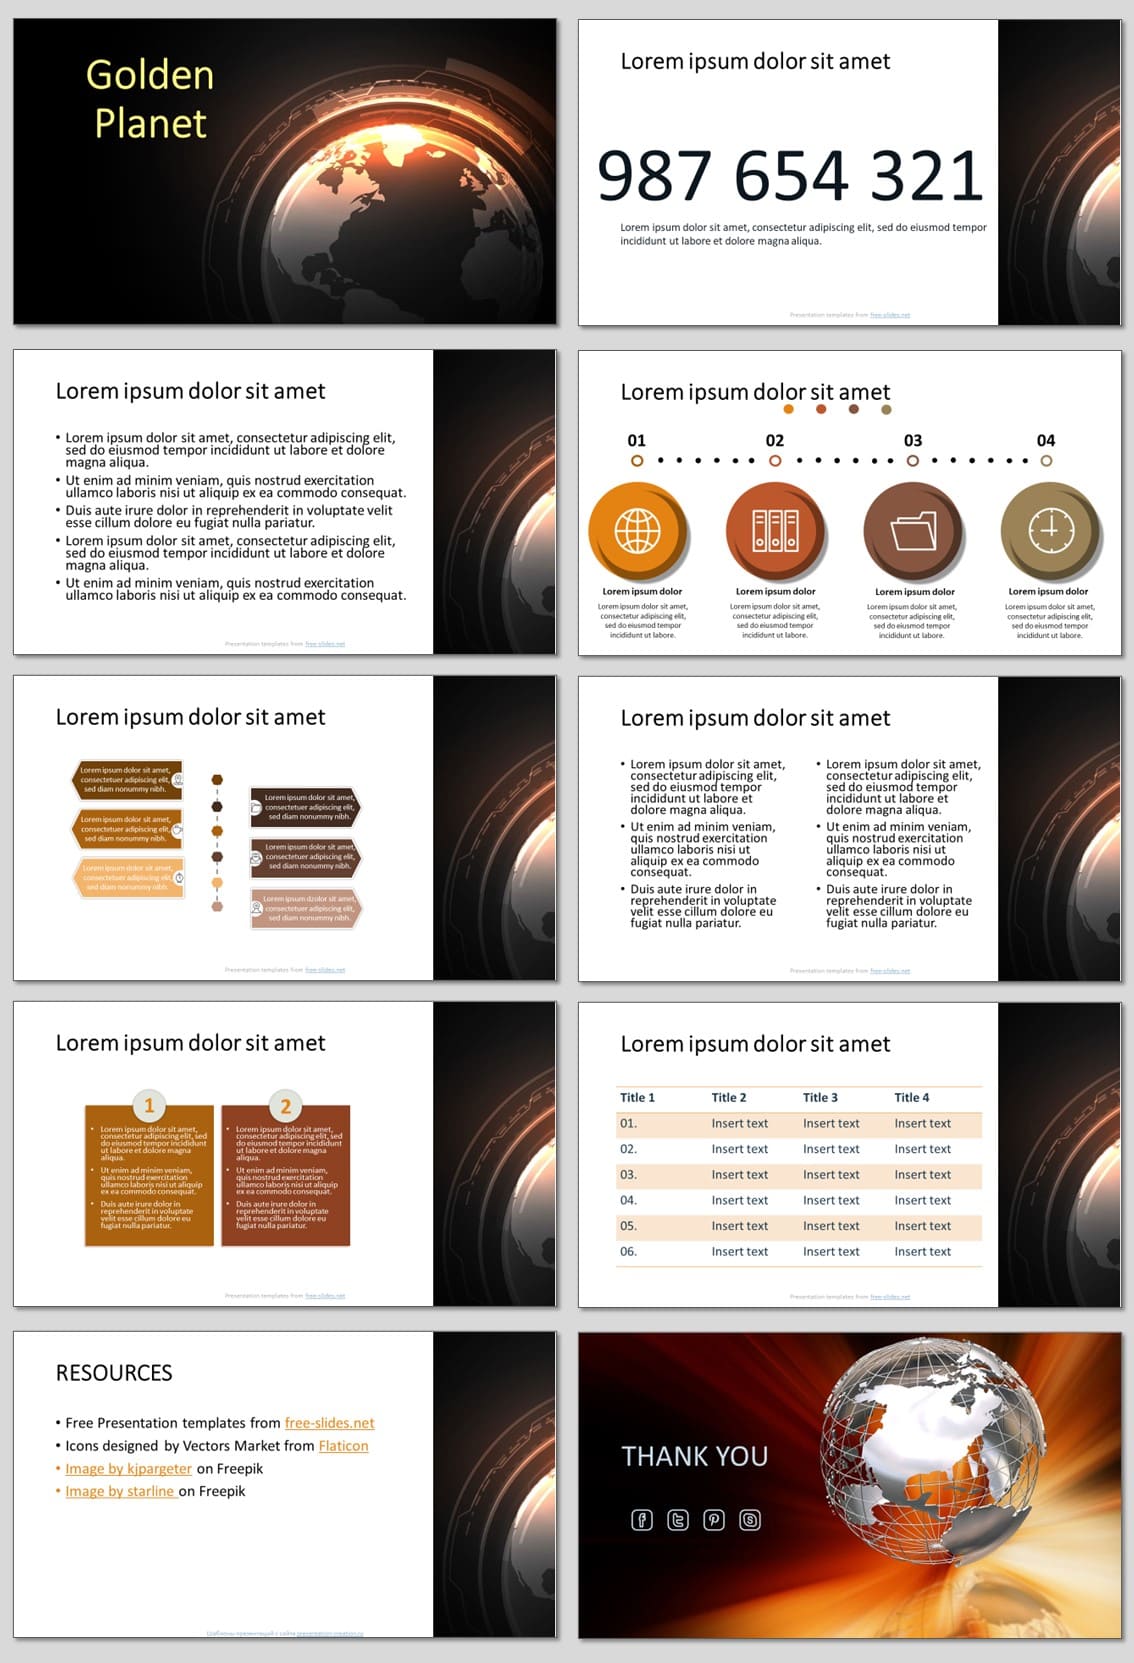 Golden Planet - Free PowerPoint Template and Google Slides Theme